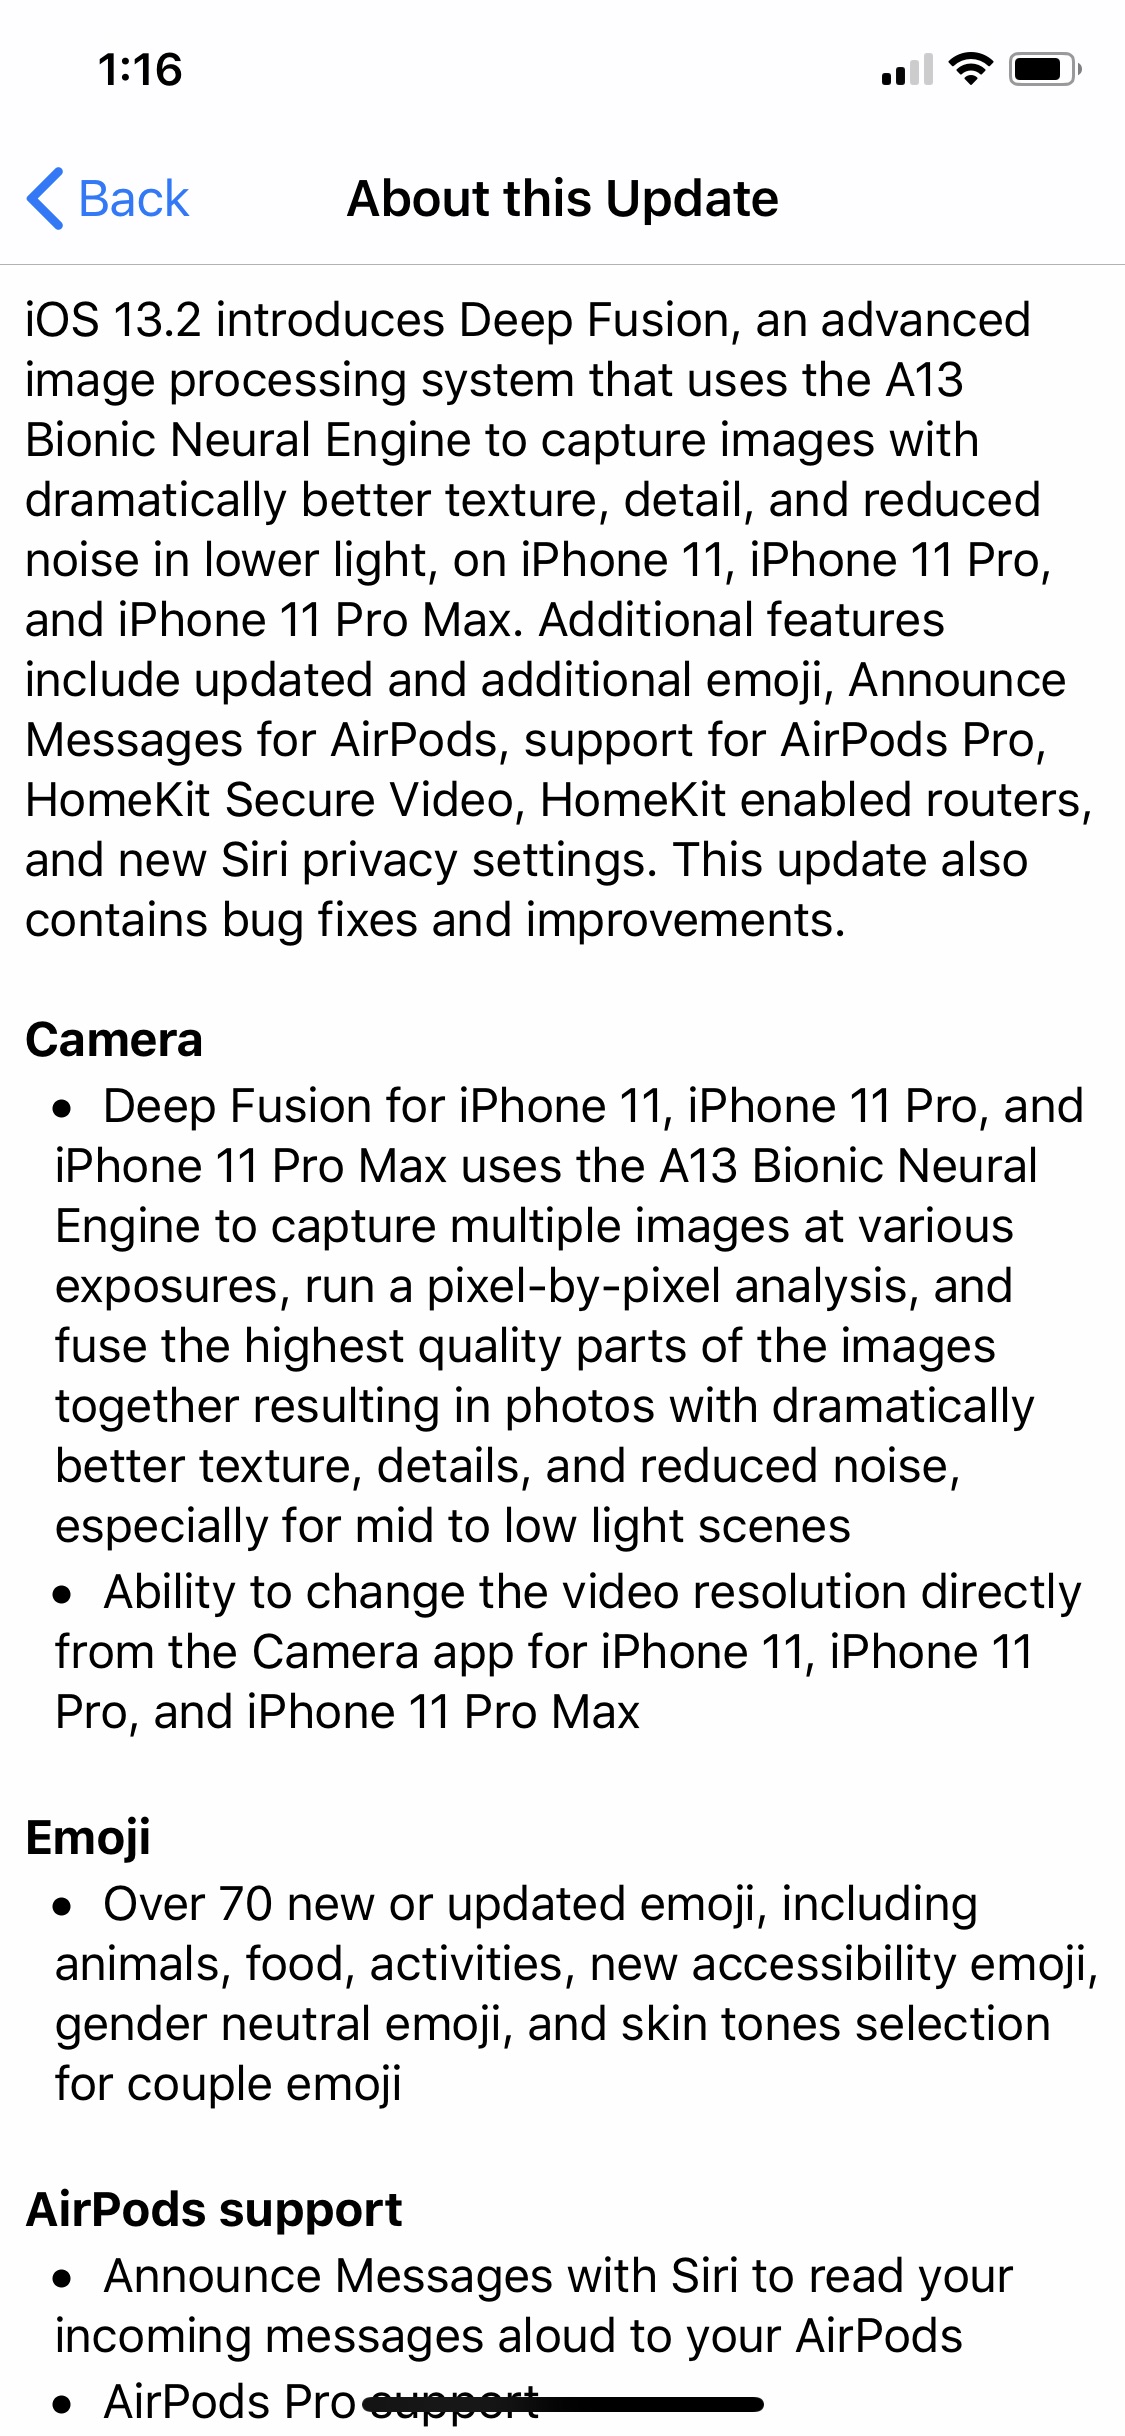 Here is the Full Changelog for iOS 13.2